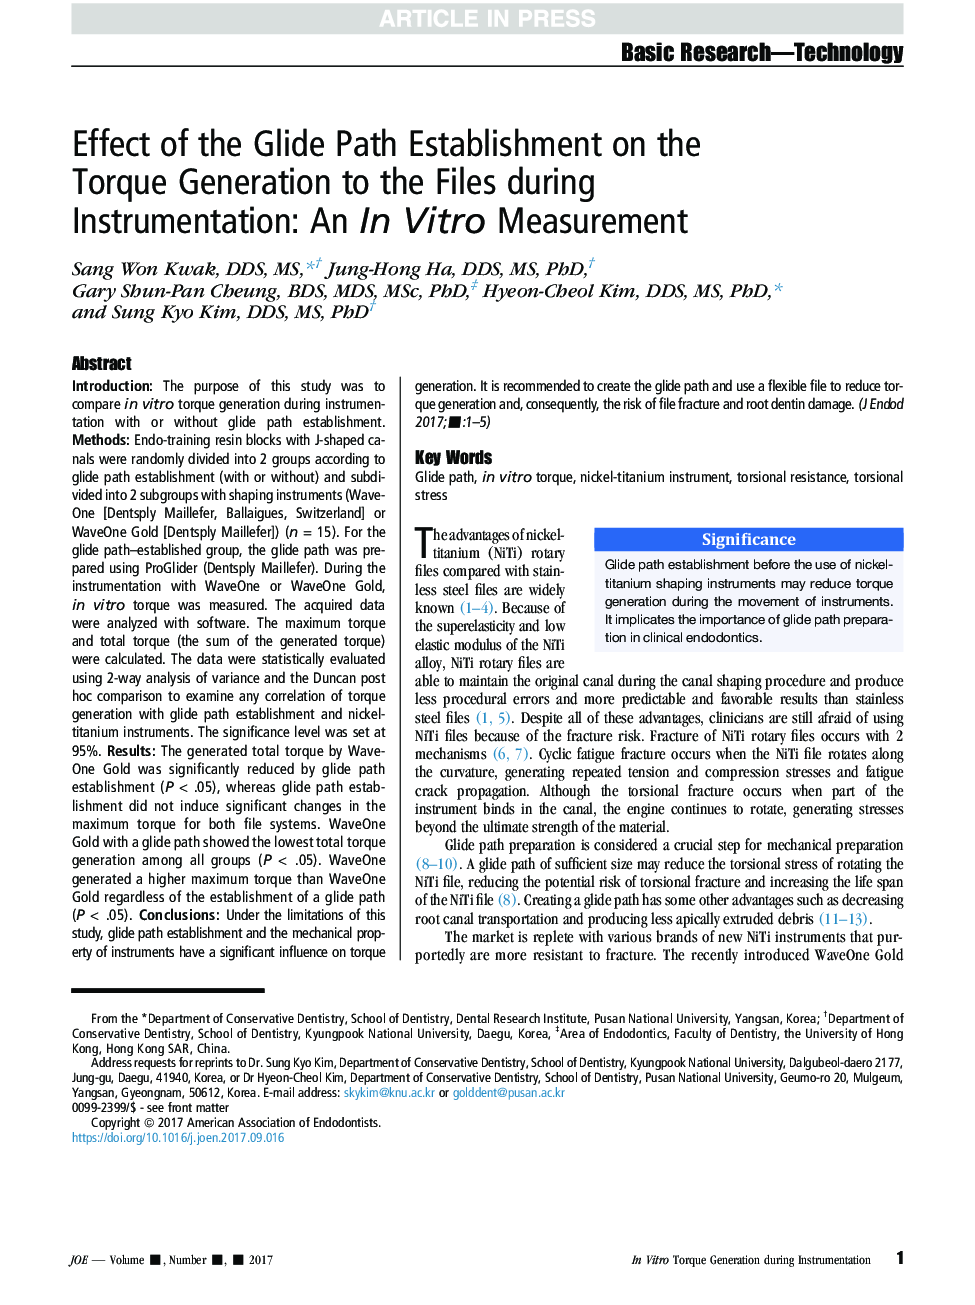 Effect of the Glide Path Establishment on the Torque Generation to the Files during Instrumentation: An InÂ Vitro Measurement